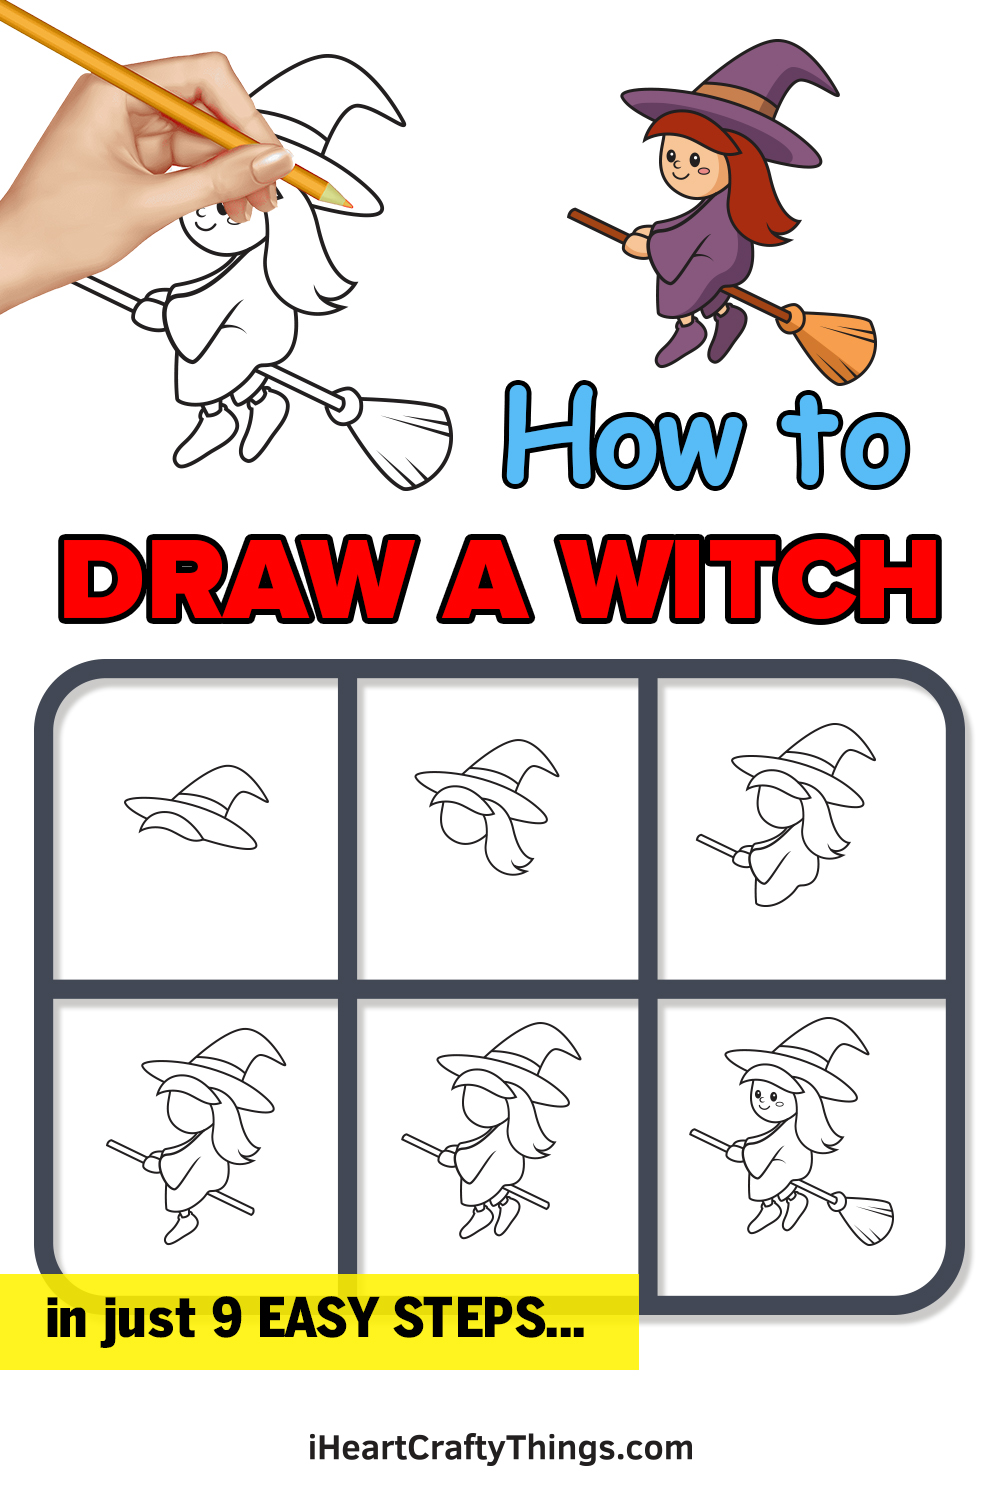 how to draw a witch in 9 easy steps